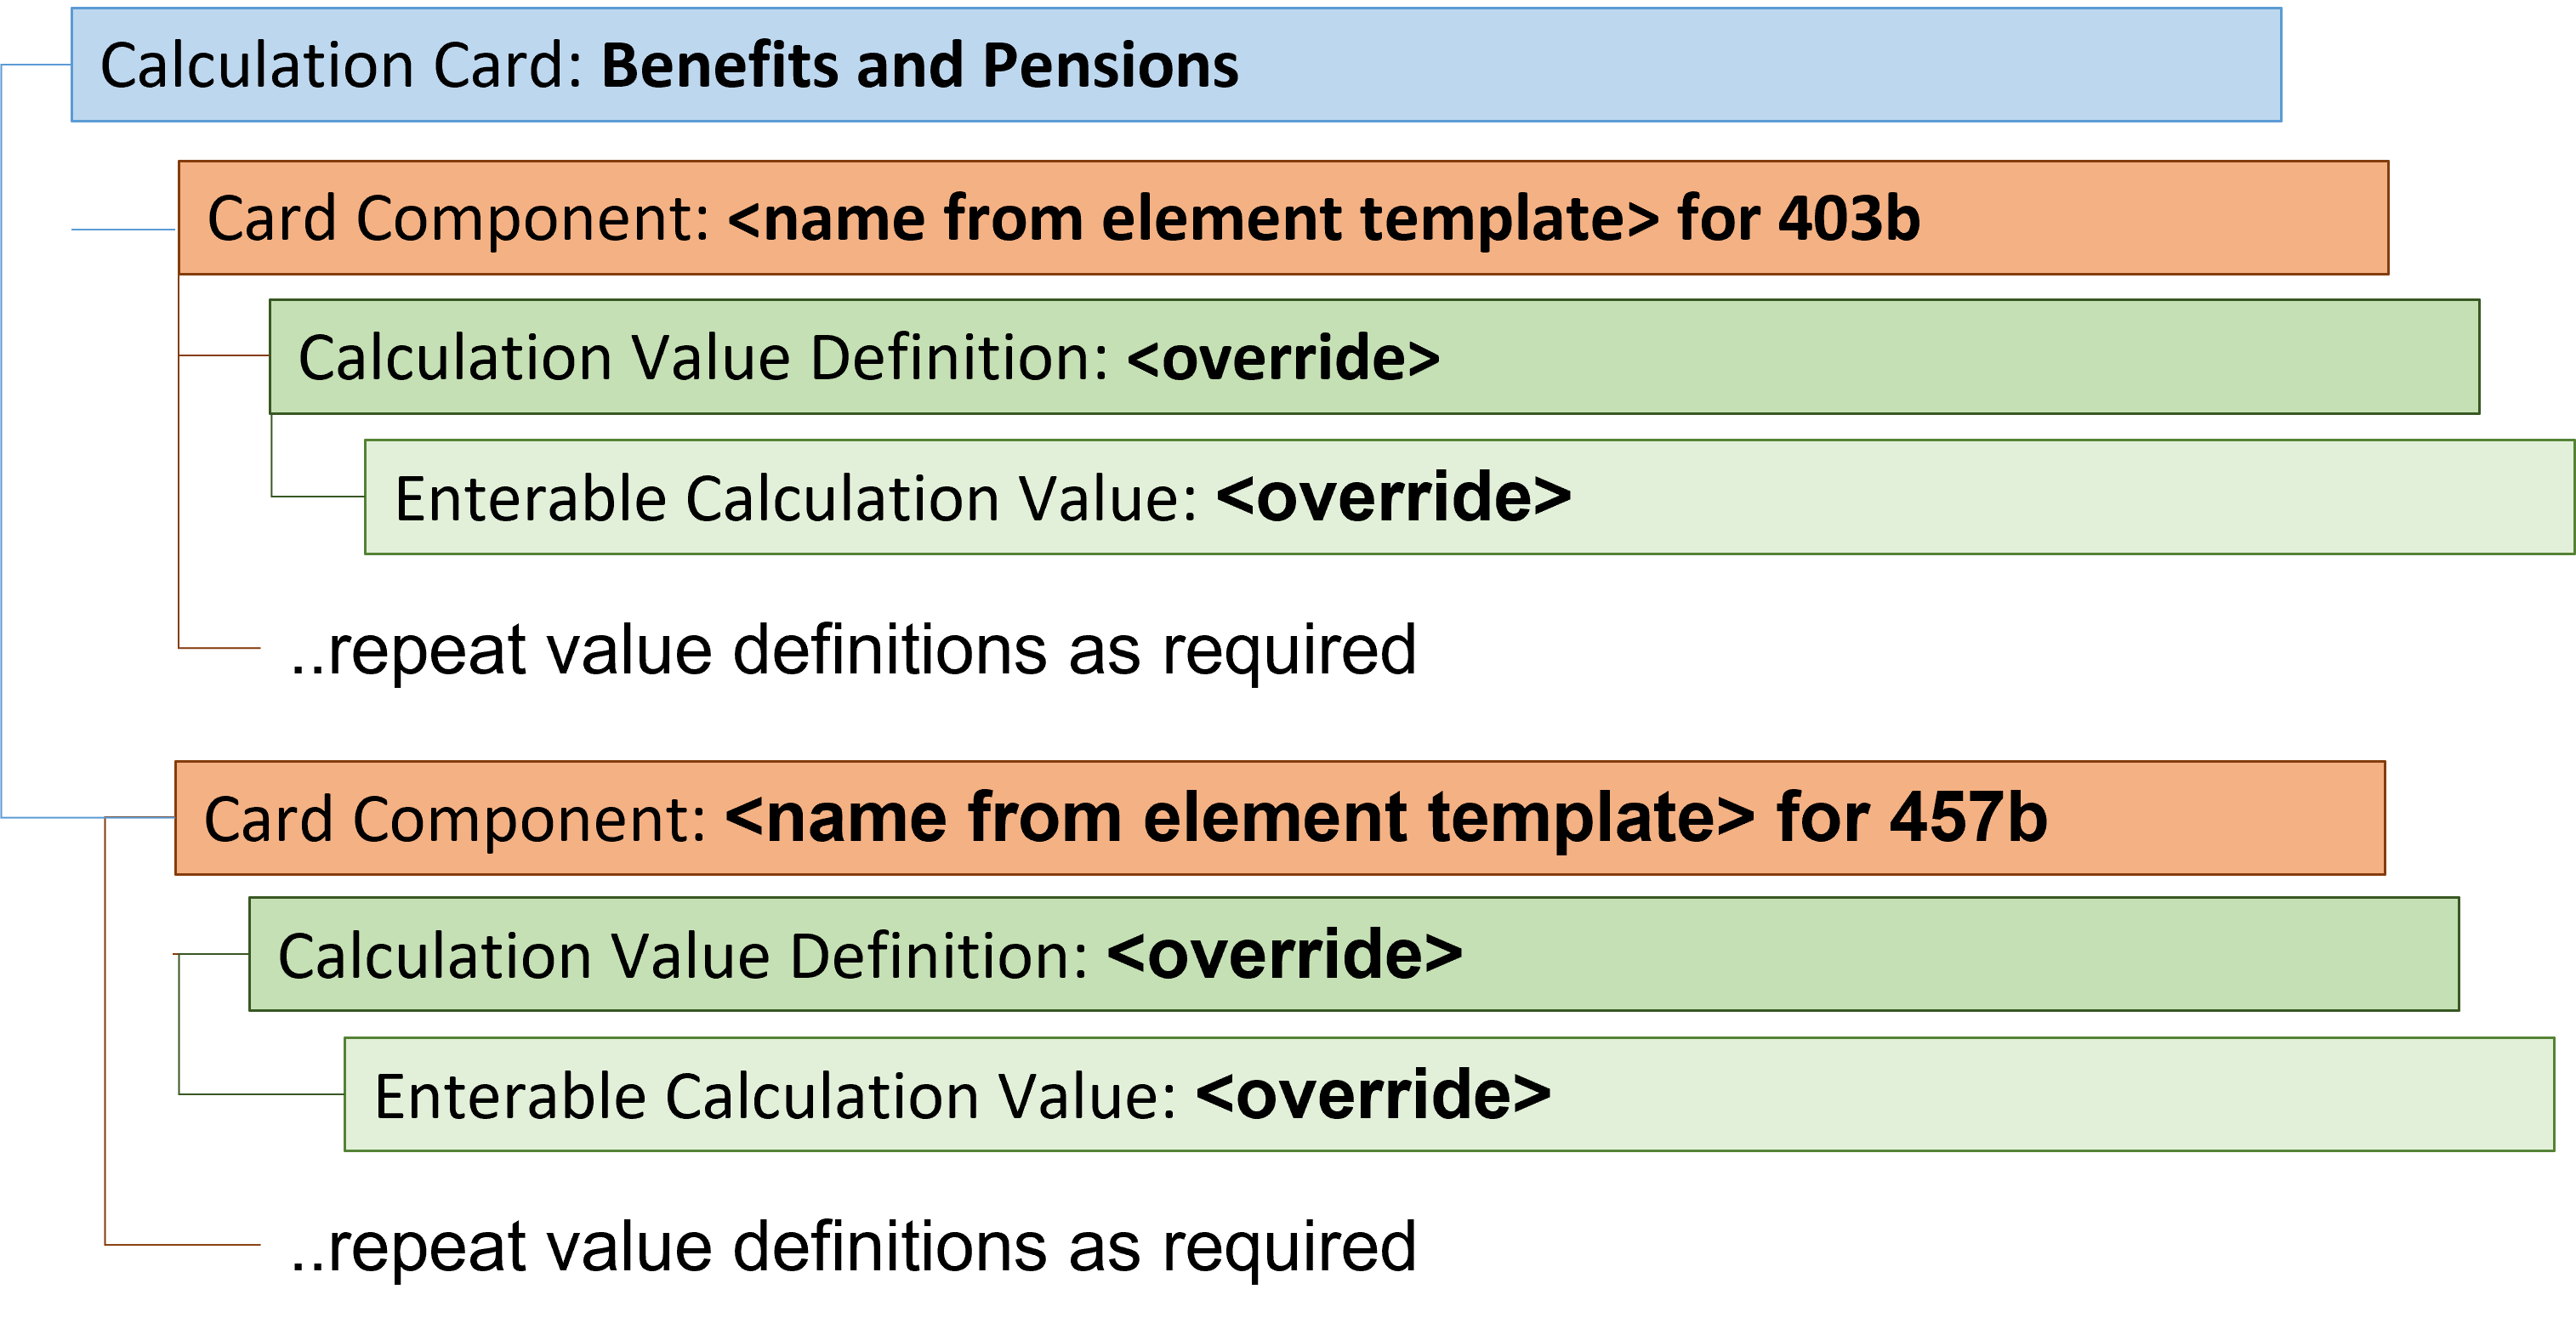 Benefits and Pensions Calculation Card Hierarchy